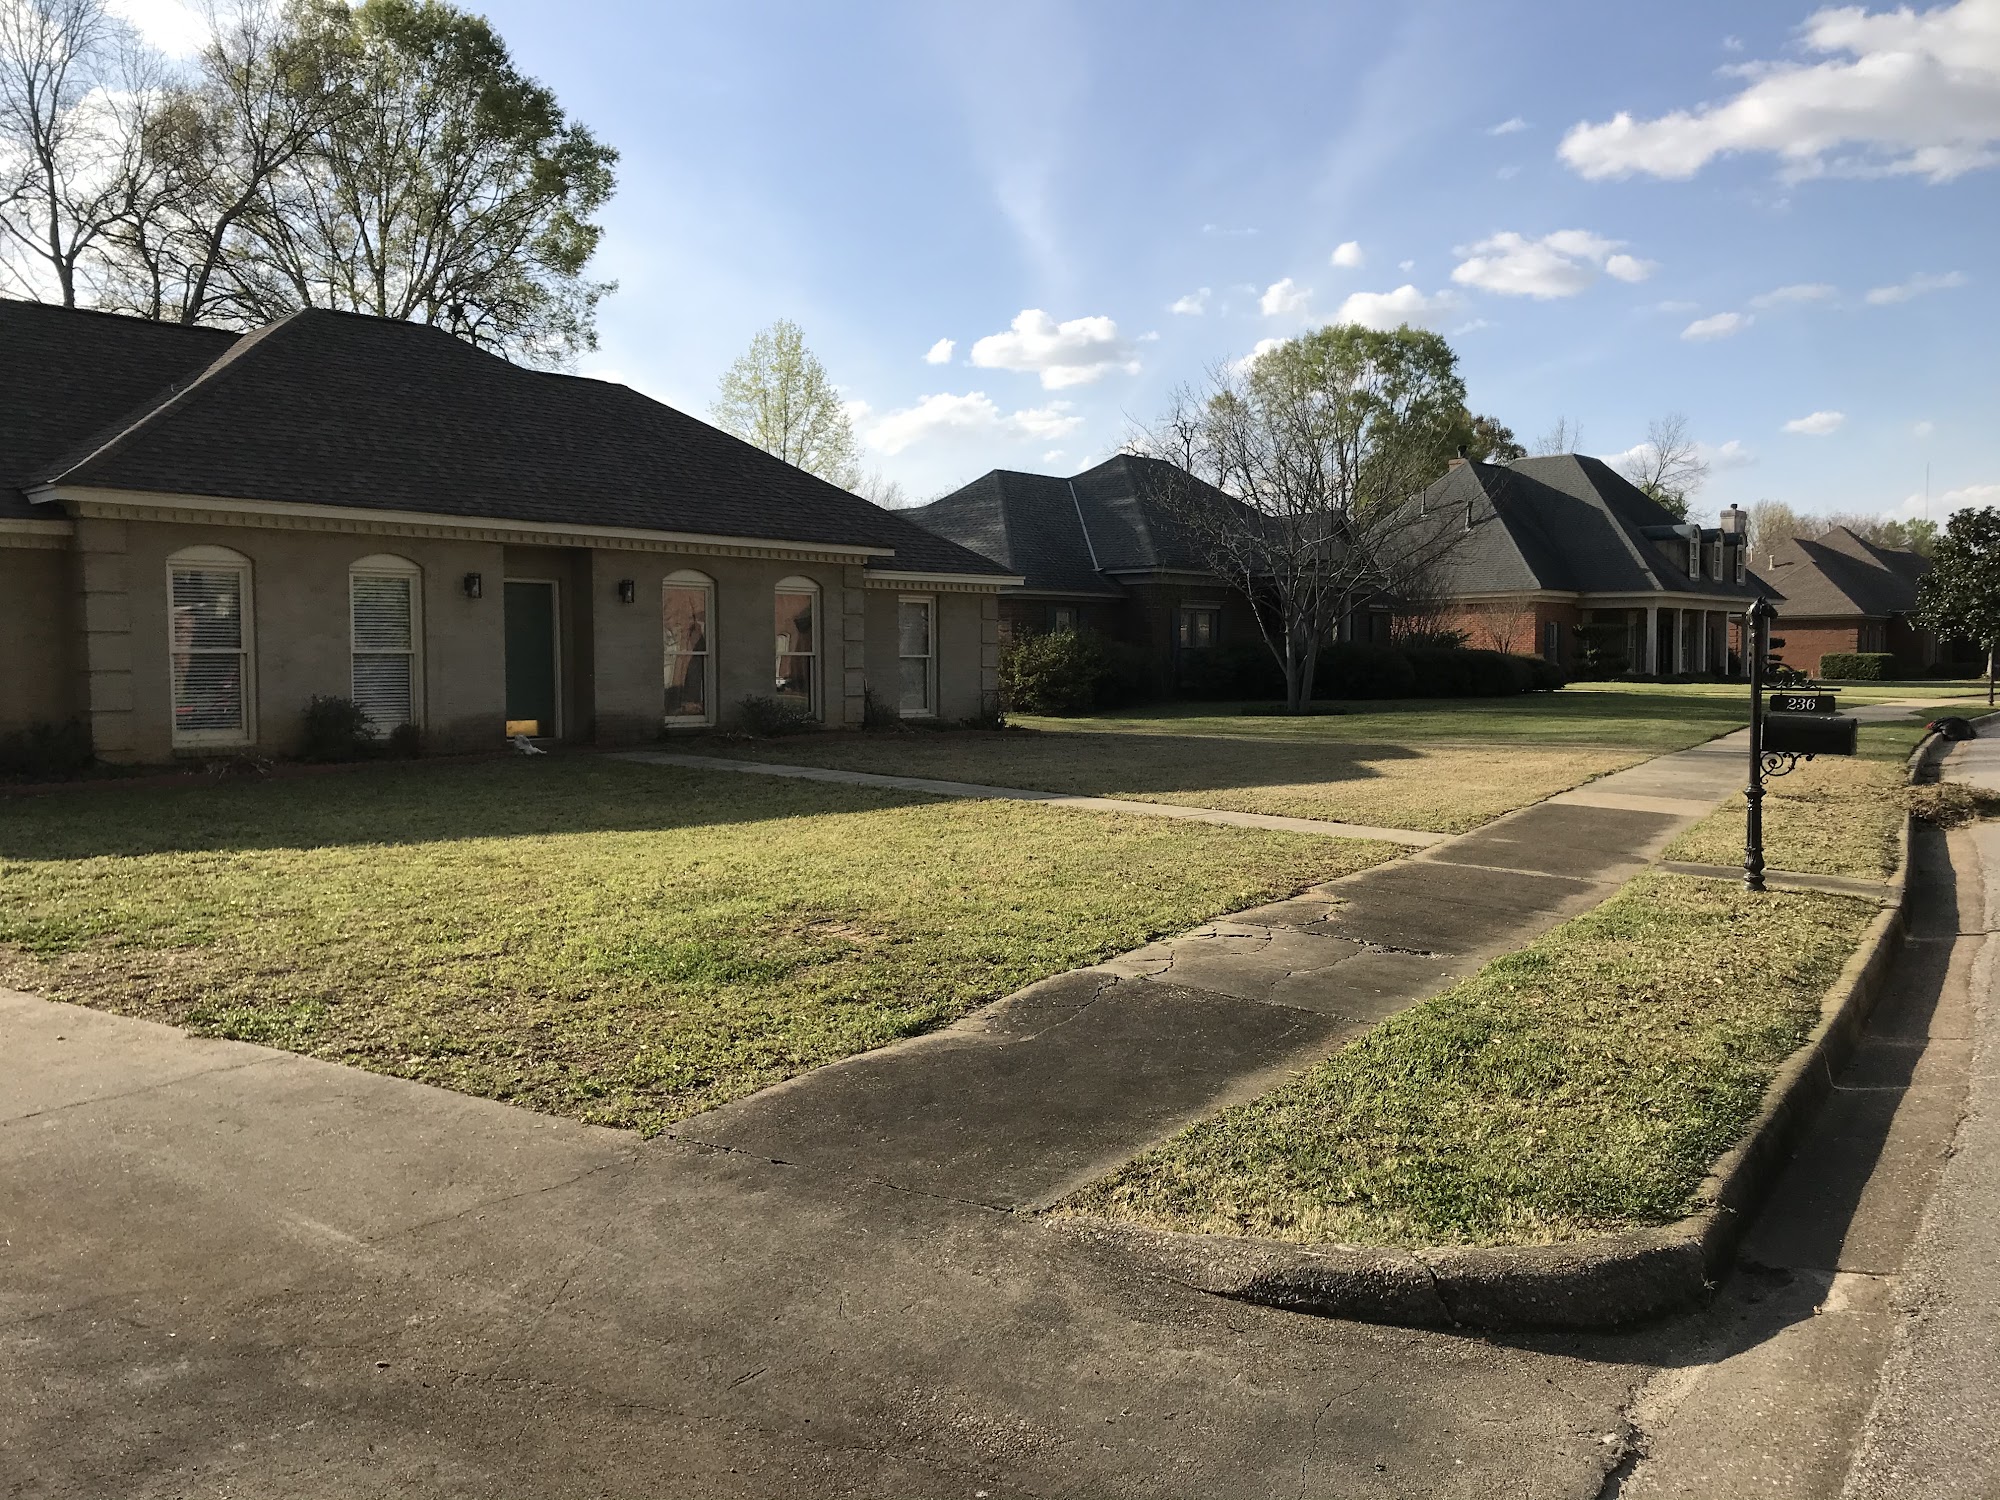 Mitch's Lawn Care S Conecuh St, Greenville Alabama 36037